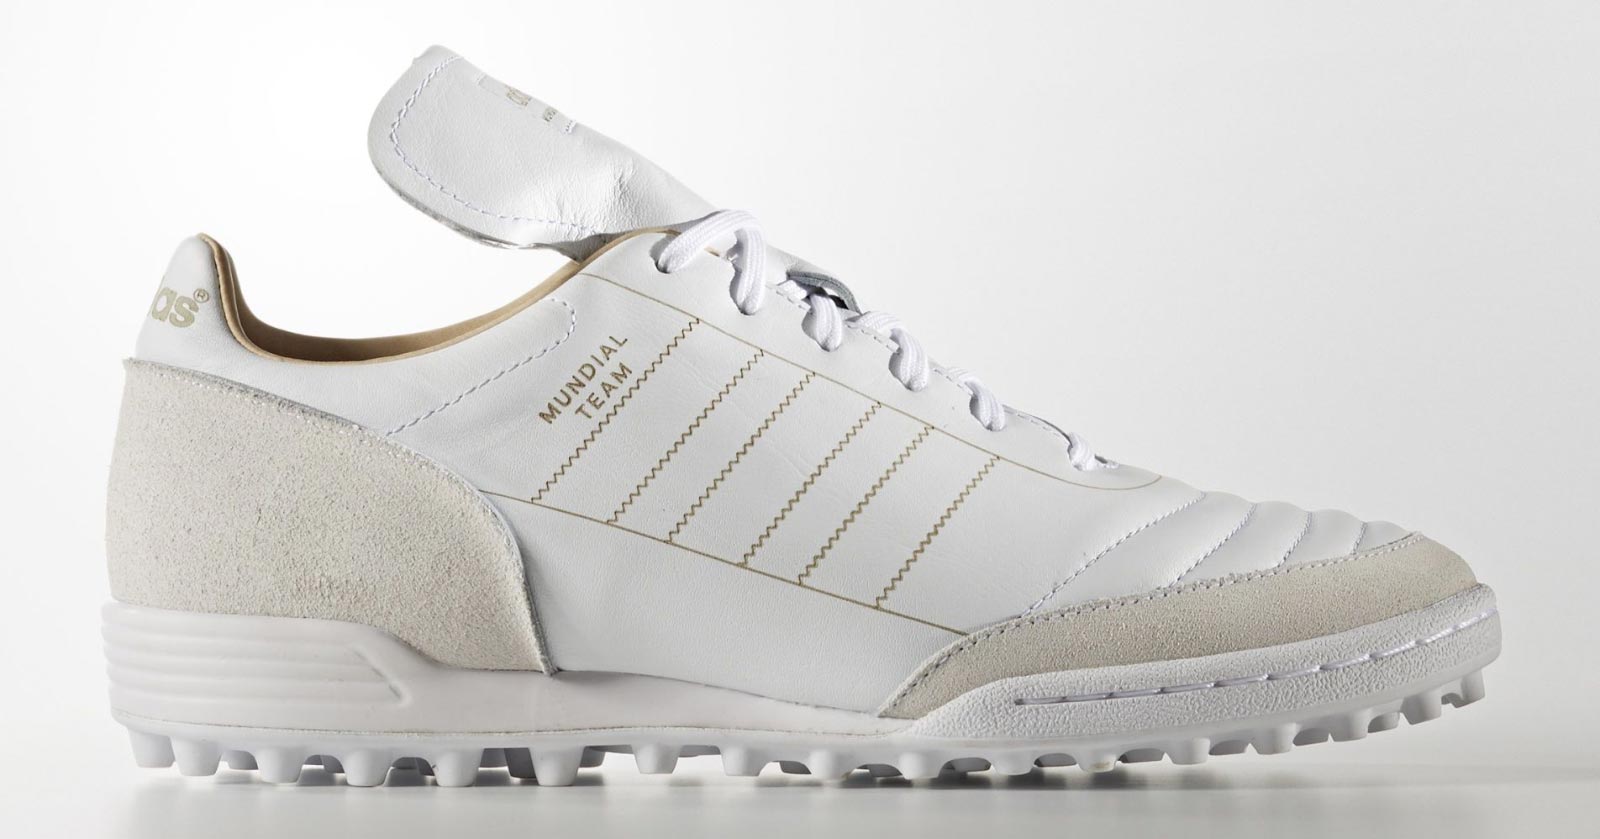 Ultra-Classy Adidas Mundial Modern Craft Boots Released - Footy Headlines